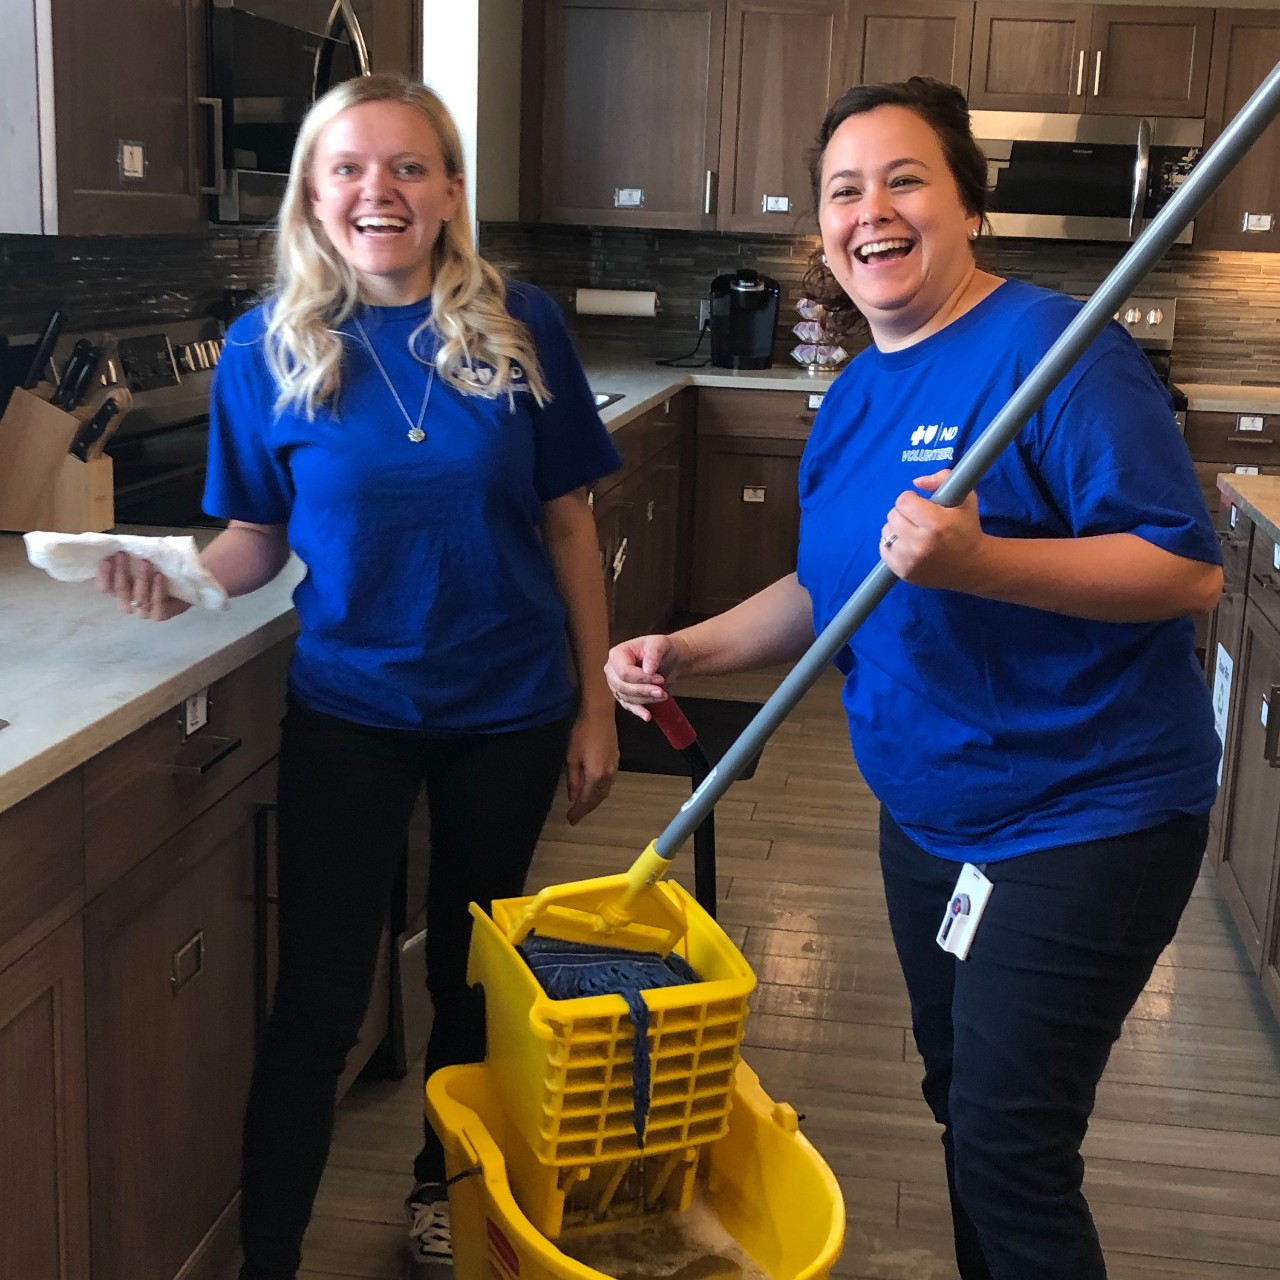 BCBSND employees volunteering, mopping floors in a kitchen at a local non-profit